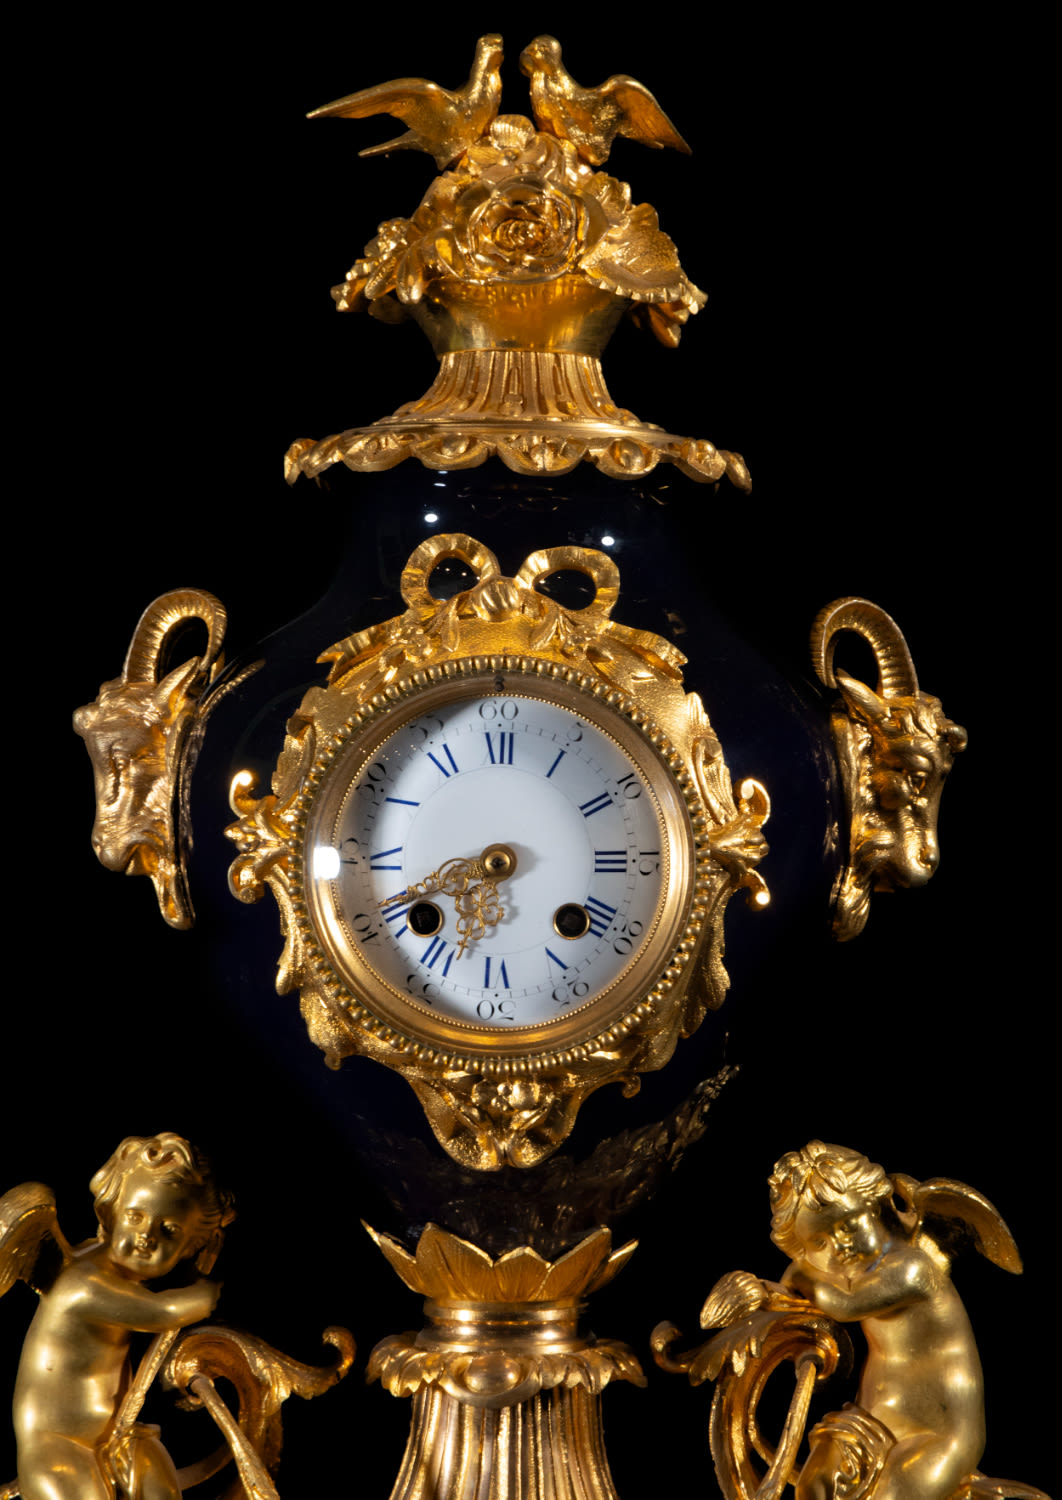 Elegant and Large Table Clock with French Sèvres Porcelain Garnish "Bleu Royale" Napoleon III of the - Image 4 of 12